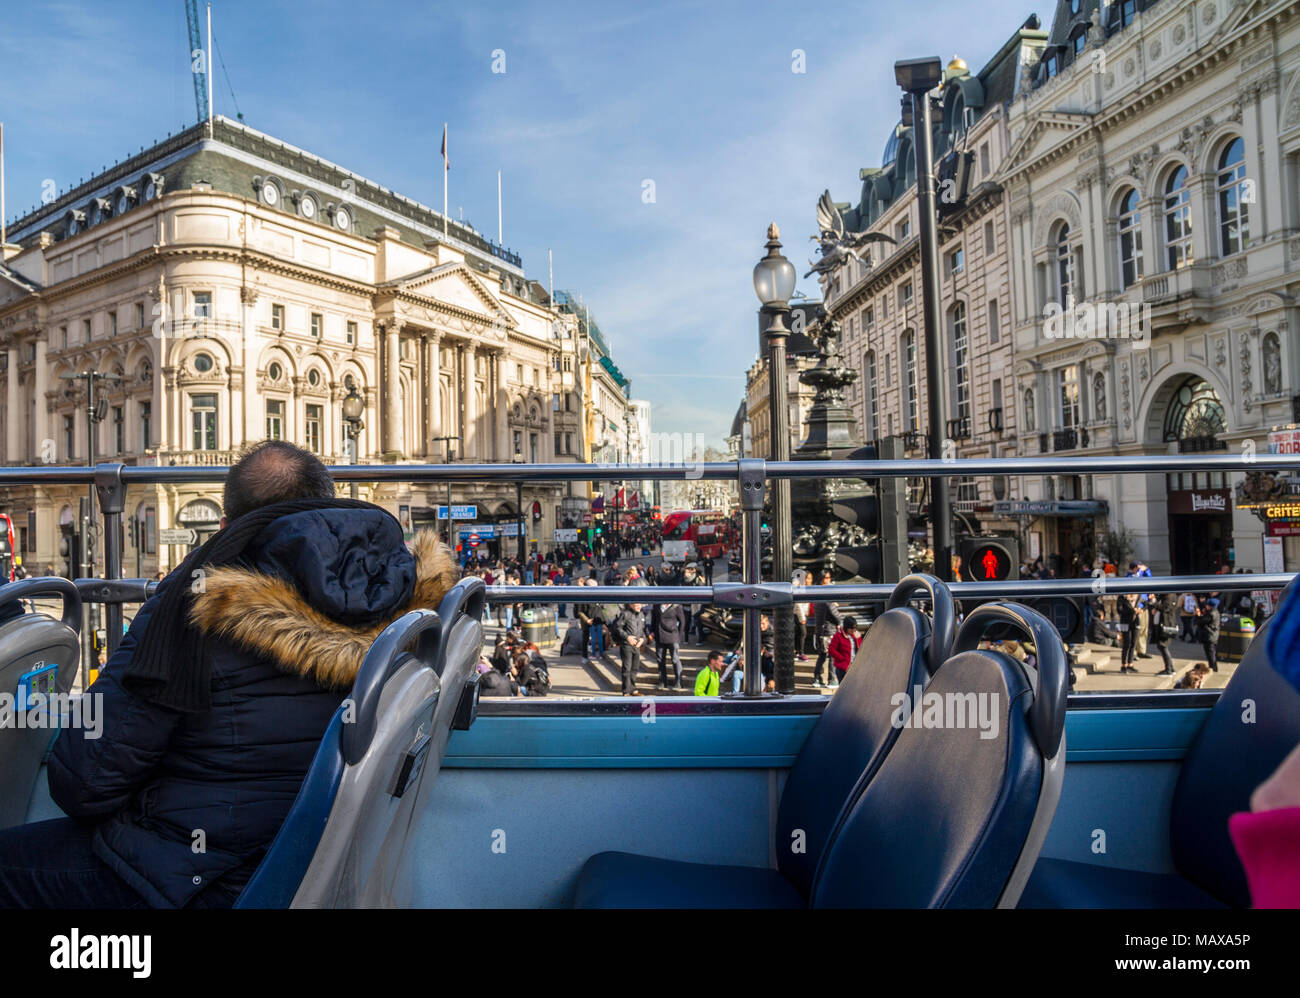 London Bus Tour Hop on Hop off, Golden Tours UK, Piccadilly Circus, Central London, Regno Unito Foto Stock